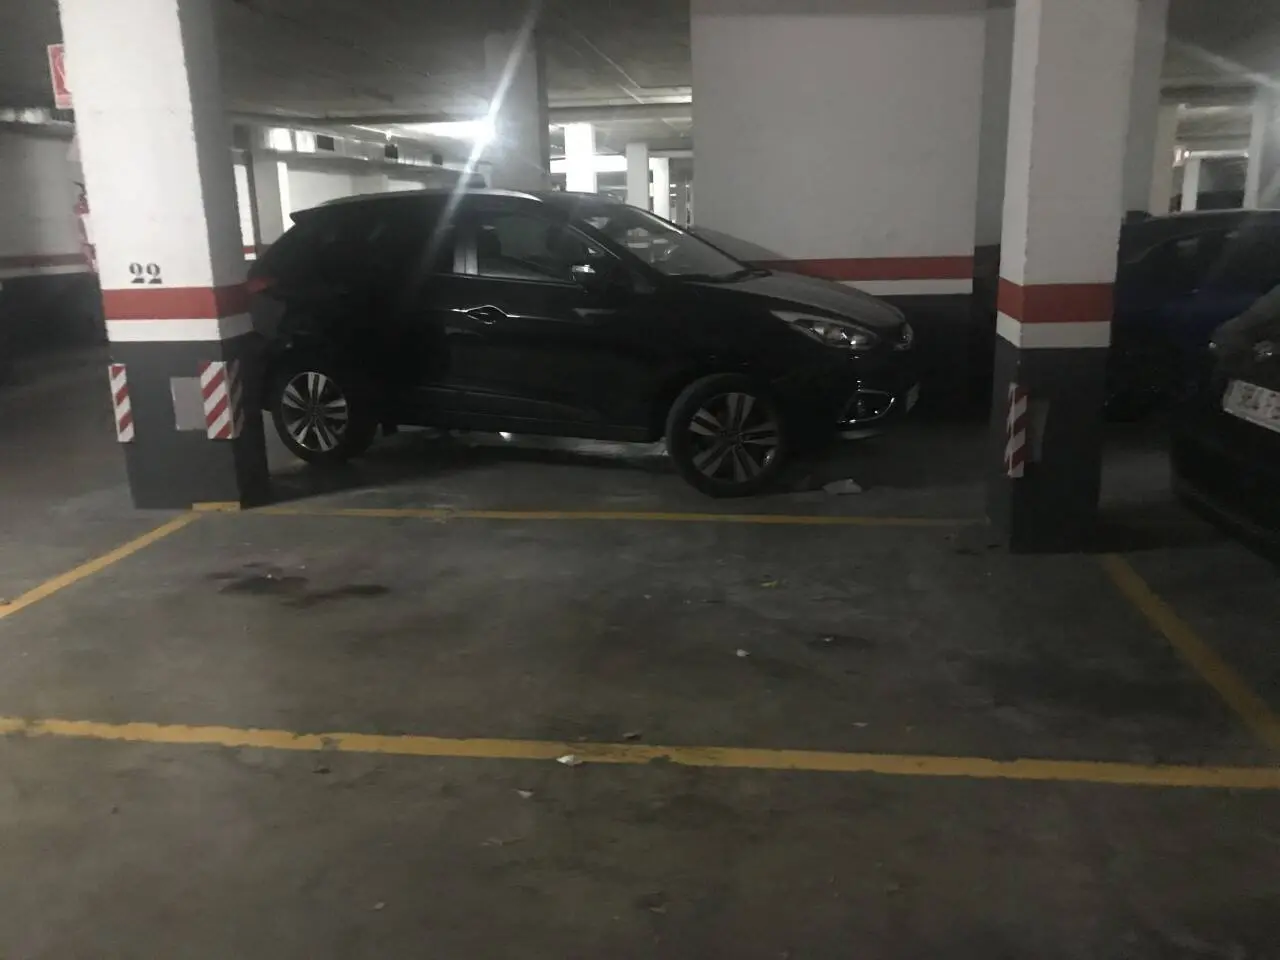 Parking space in a building located in Viladecans. Level -1.